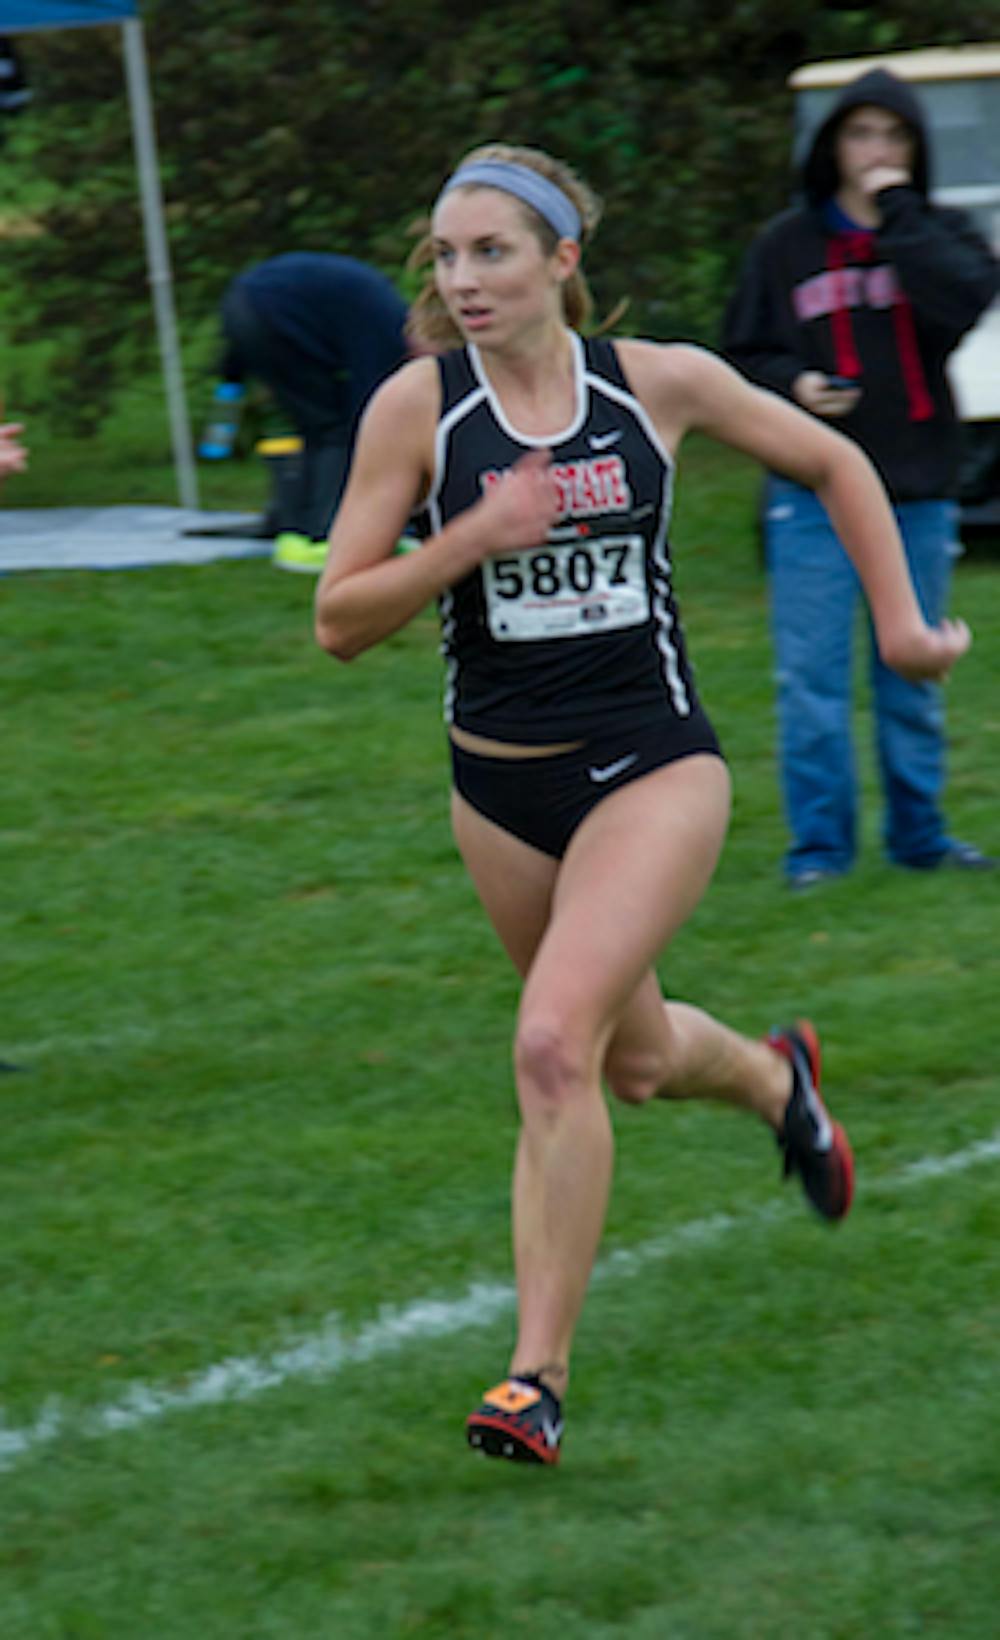 DN PHOTO EMMA FLYNN Senior MaryKate Mellen won first place Friday afternoon during the Ball State Invitational at Elks Country Club. This race was a career-best for Mellen with a time of 18:08:70